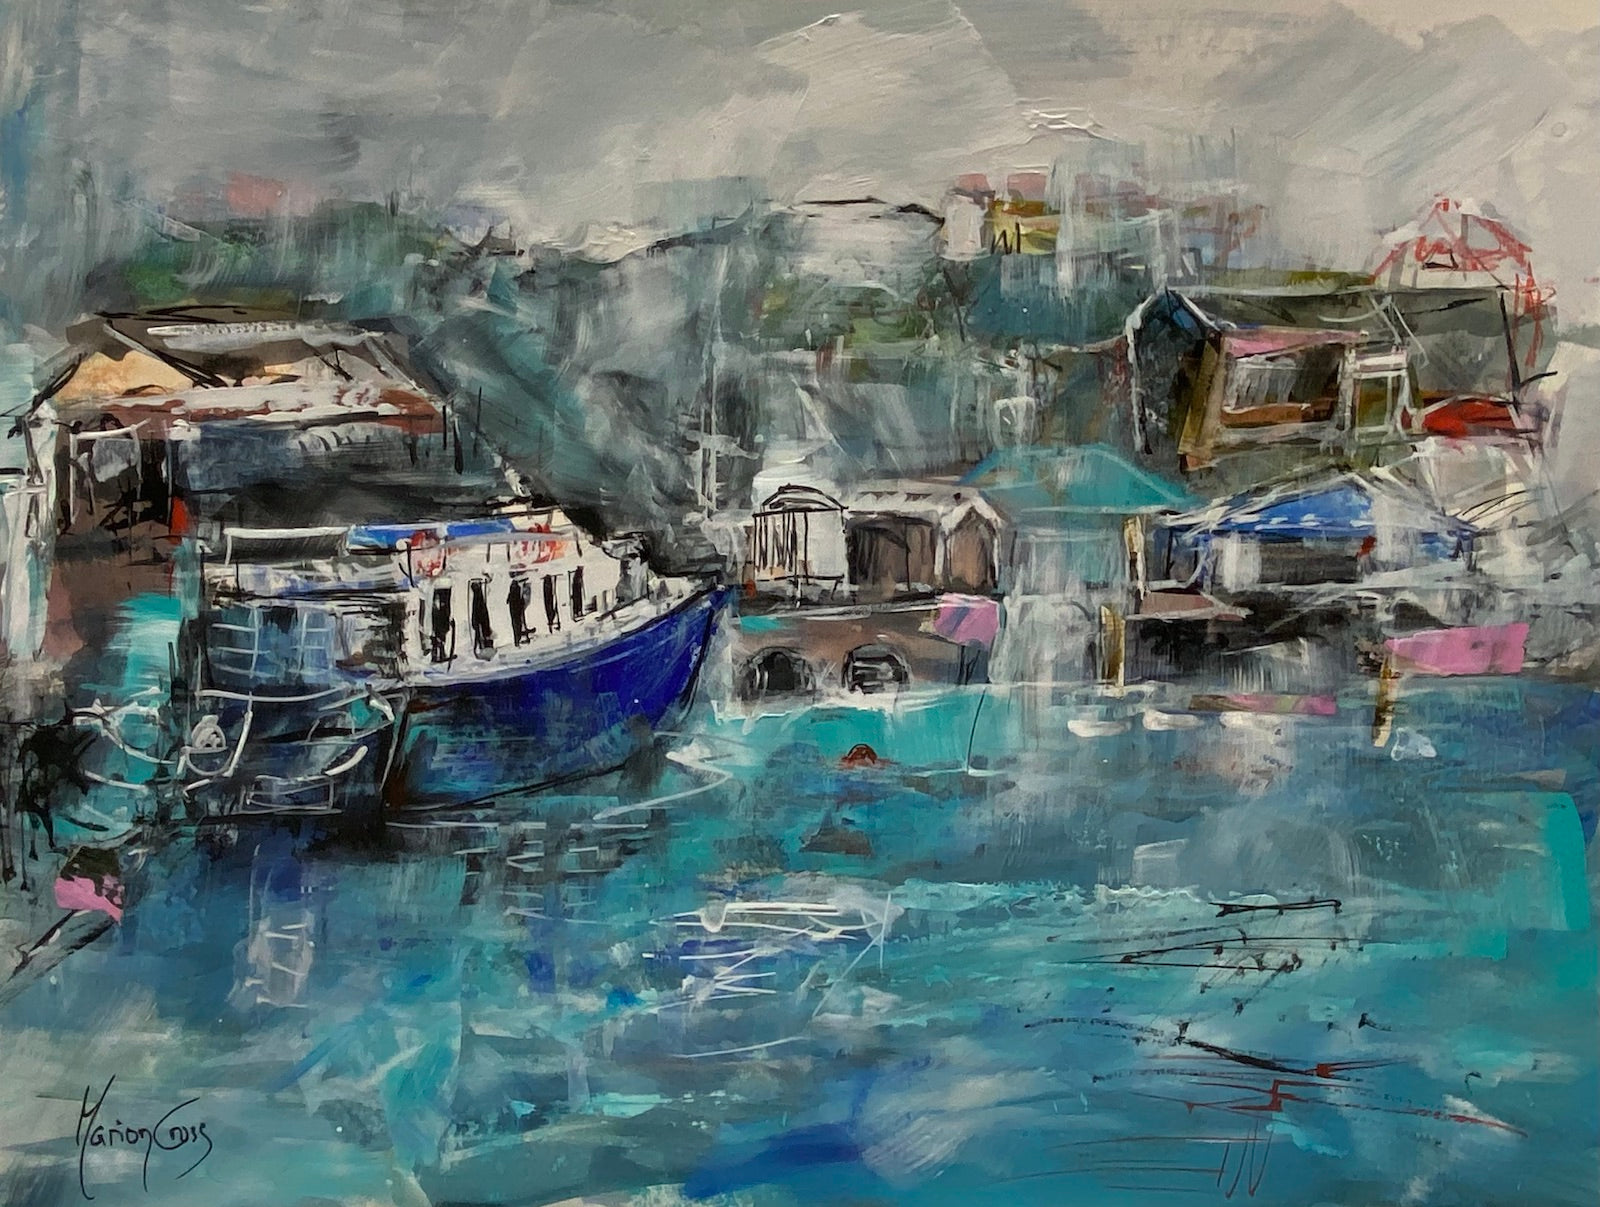 Down by the Harbour - ORIGINAL PAINTING